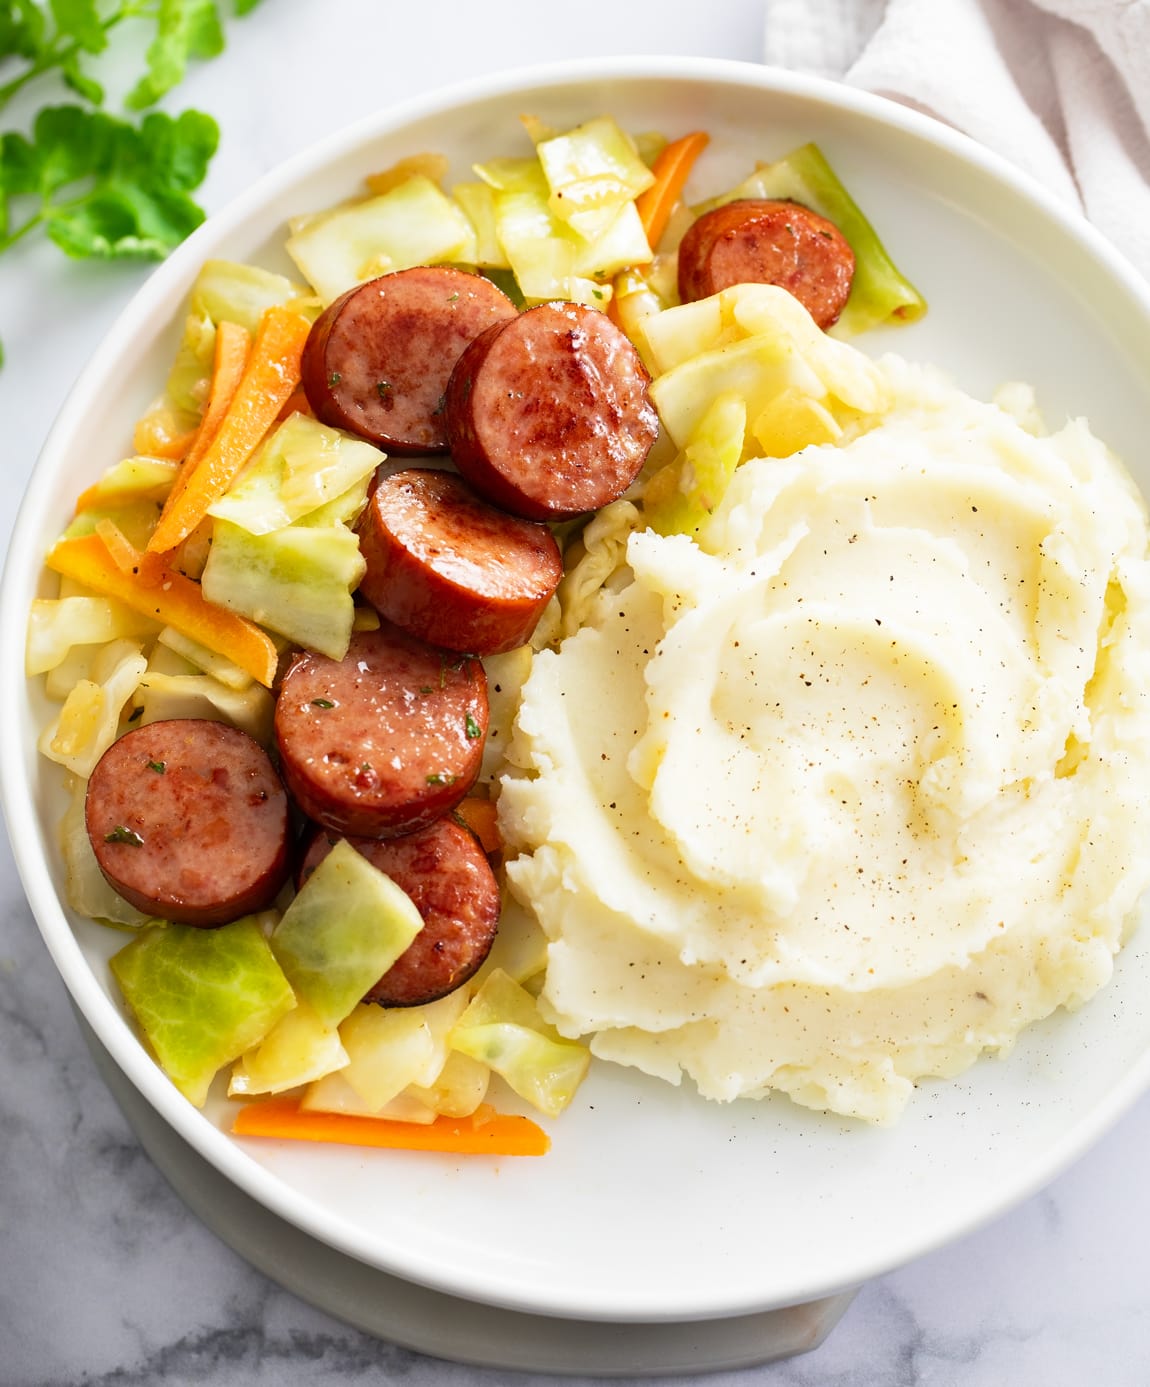 Cabbage and Sausage on a white plate with mashed potatoes on the side.